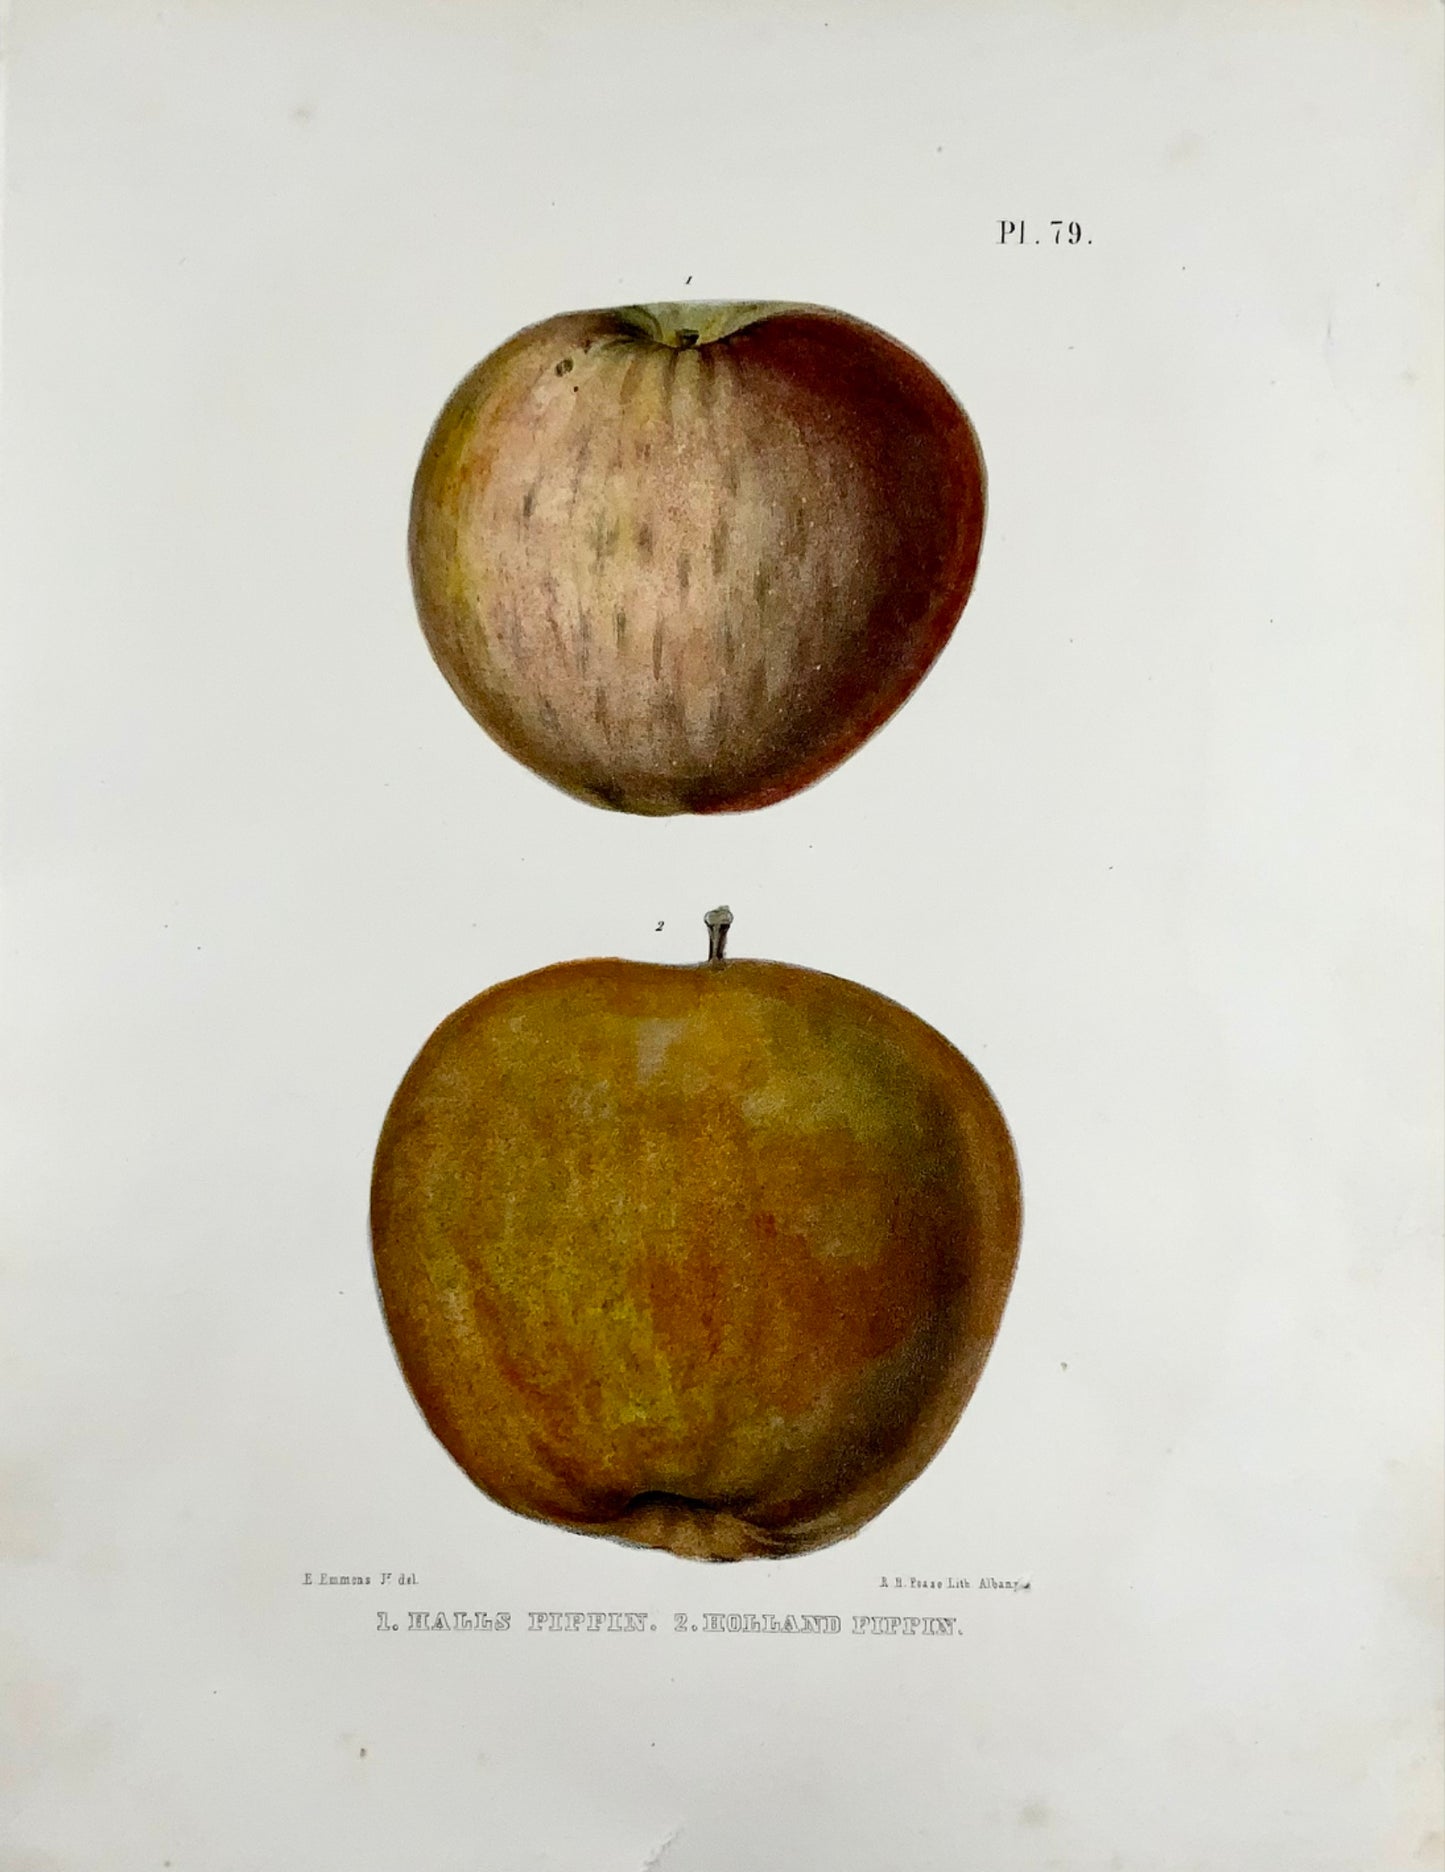 1830 c Pease lith; Emmons - Fruit: Apple Pippin - hand coloured stone lithograph - Botany